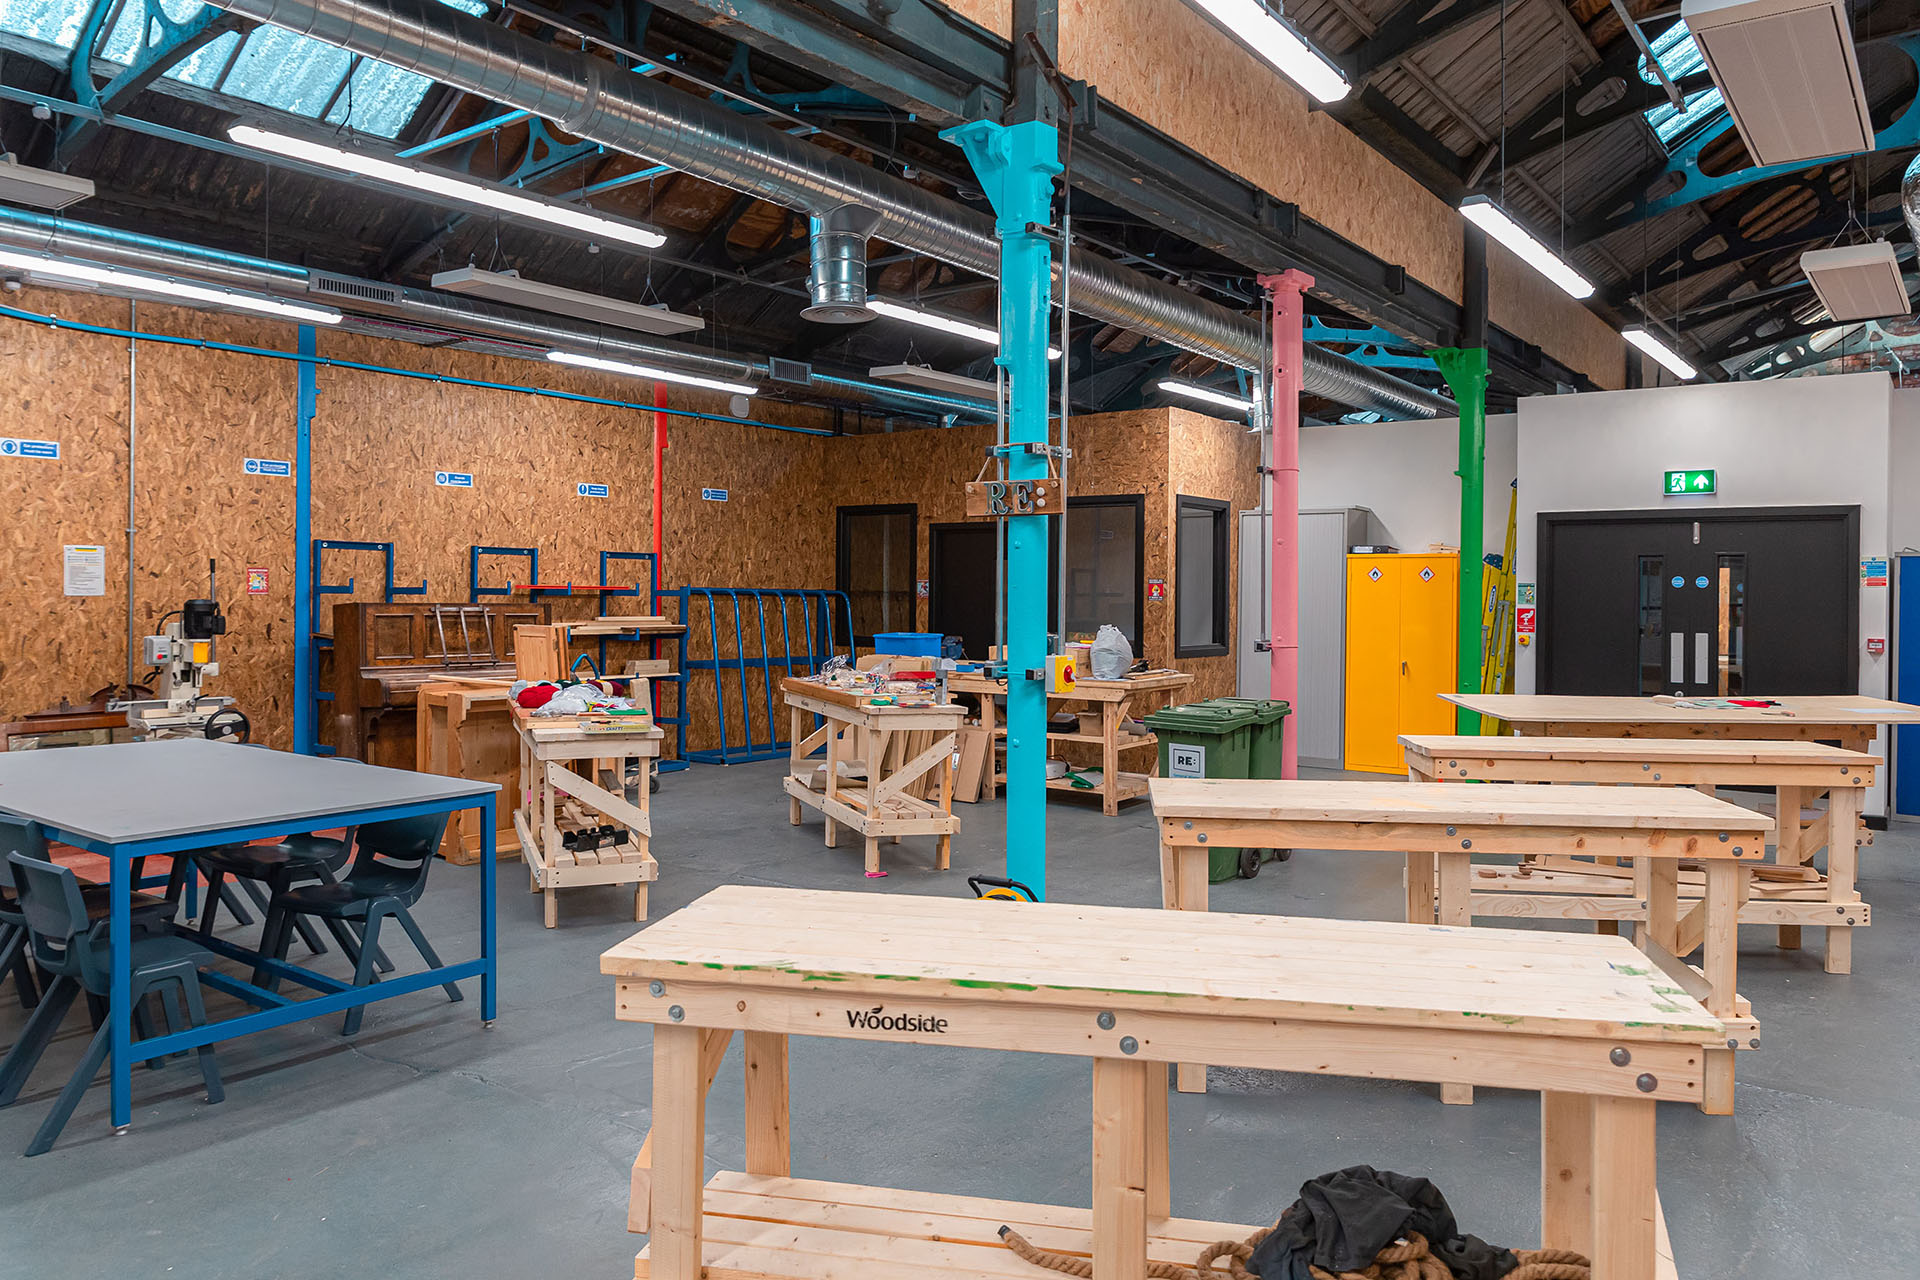 A look at one of the workshop classrooms Leeds City College has to offer, with multiple work benches for students